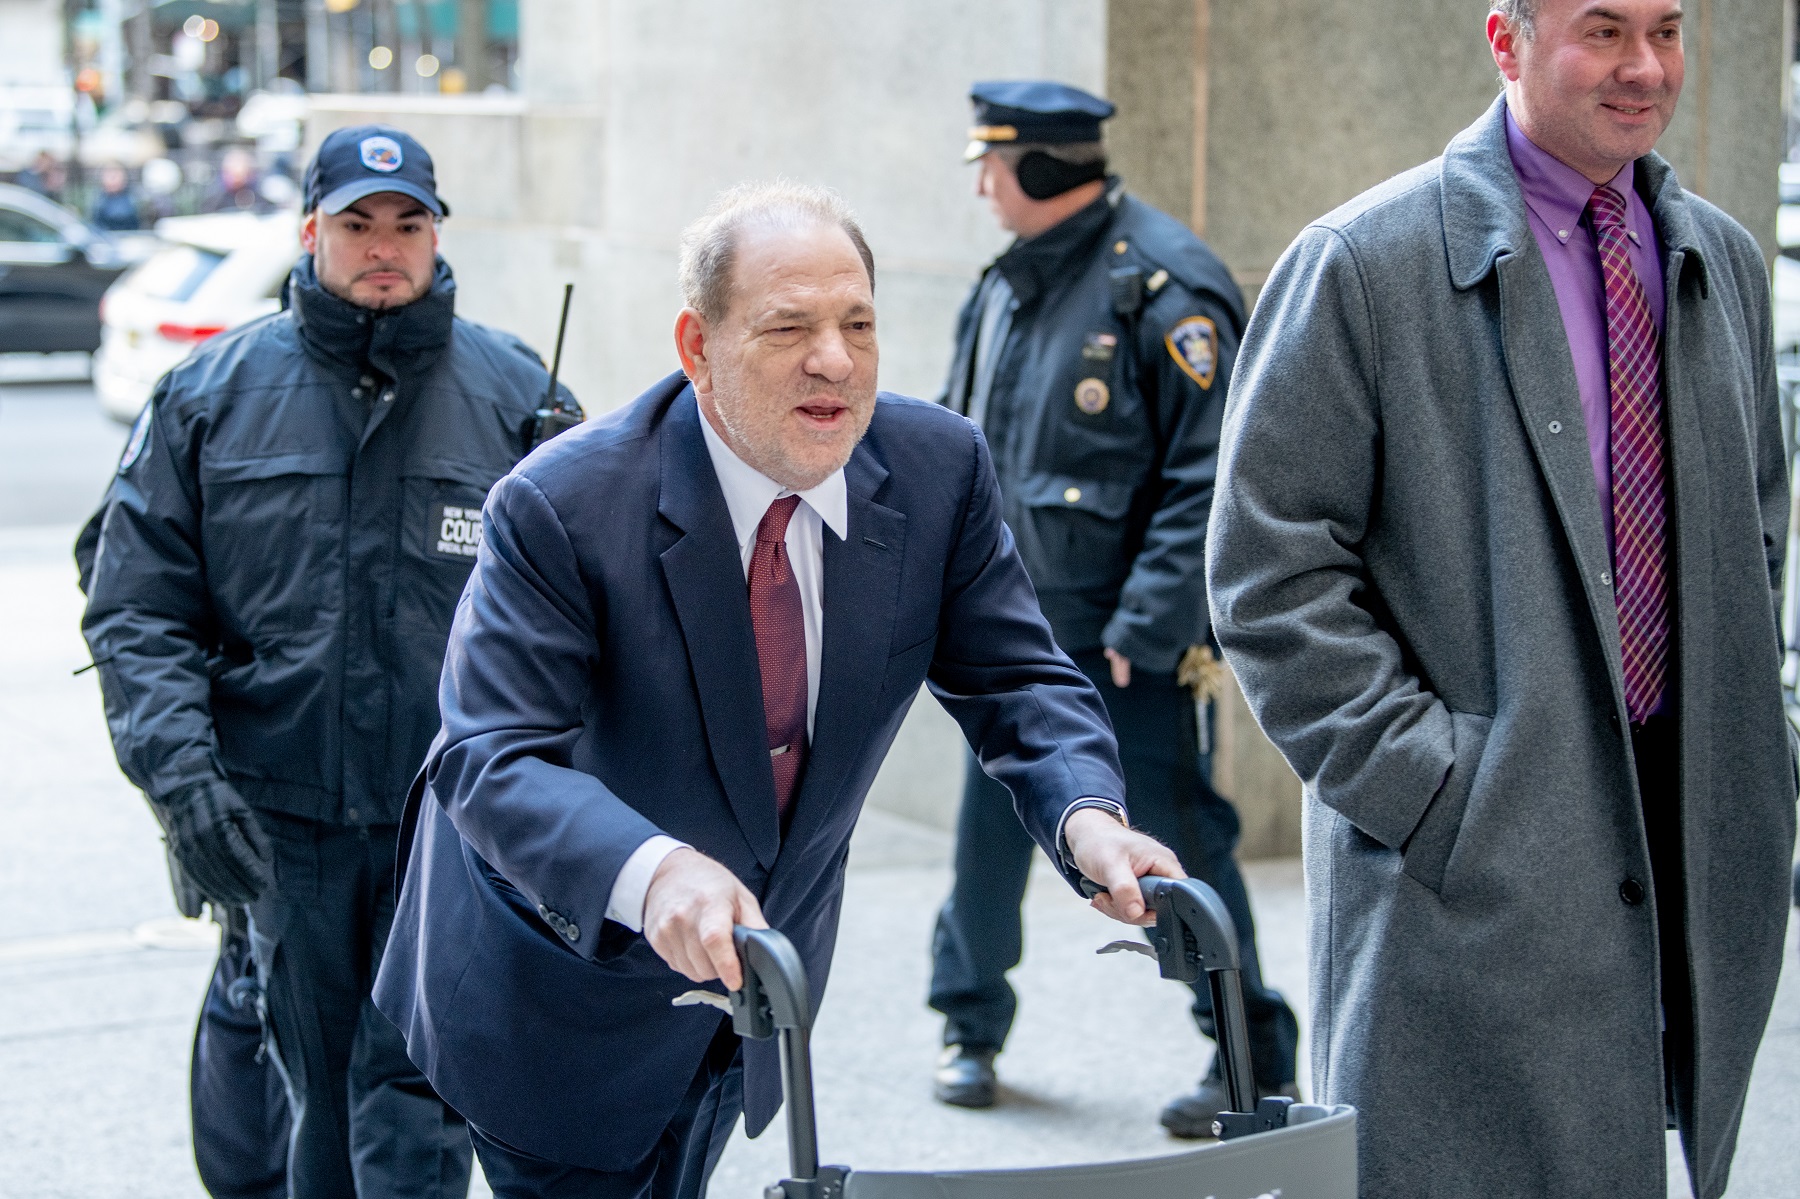 NEW YORK, NEW YORK - JANUARY 28: Harvey Weinstein arrives in court on January 28, 2020 in New York City. Weinstein, a movie producer whose alleged sexual misconduct helped spark the #MeToo movement, pleaded not-guilty on five counts of rape and sexual assault against two unnamed women and faces a possible life sentence in prison. (Photo by Roy Rochlin/Getty Images)